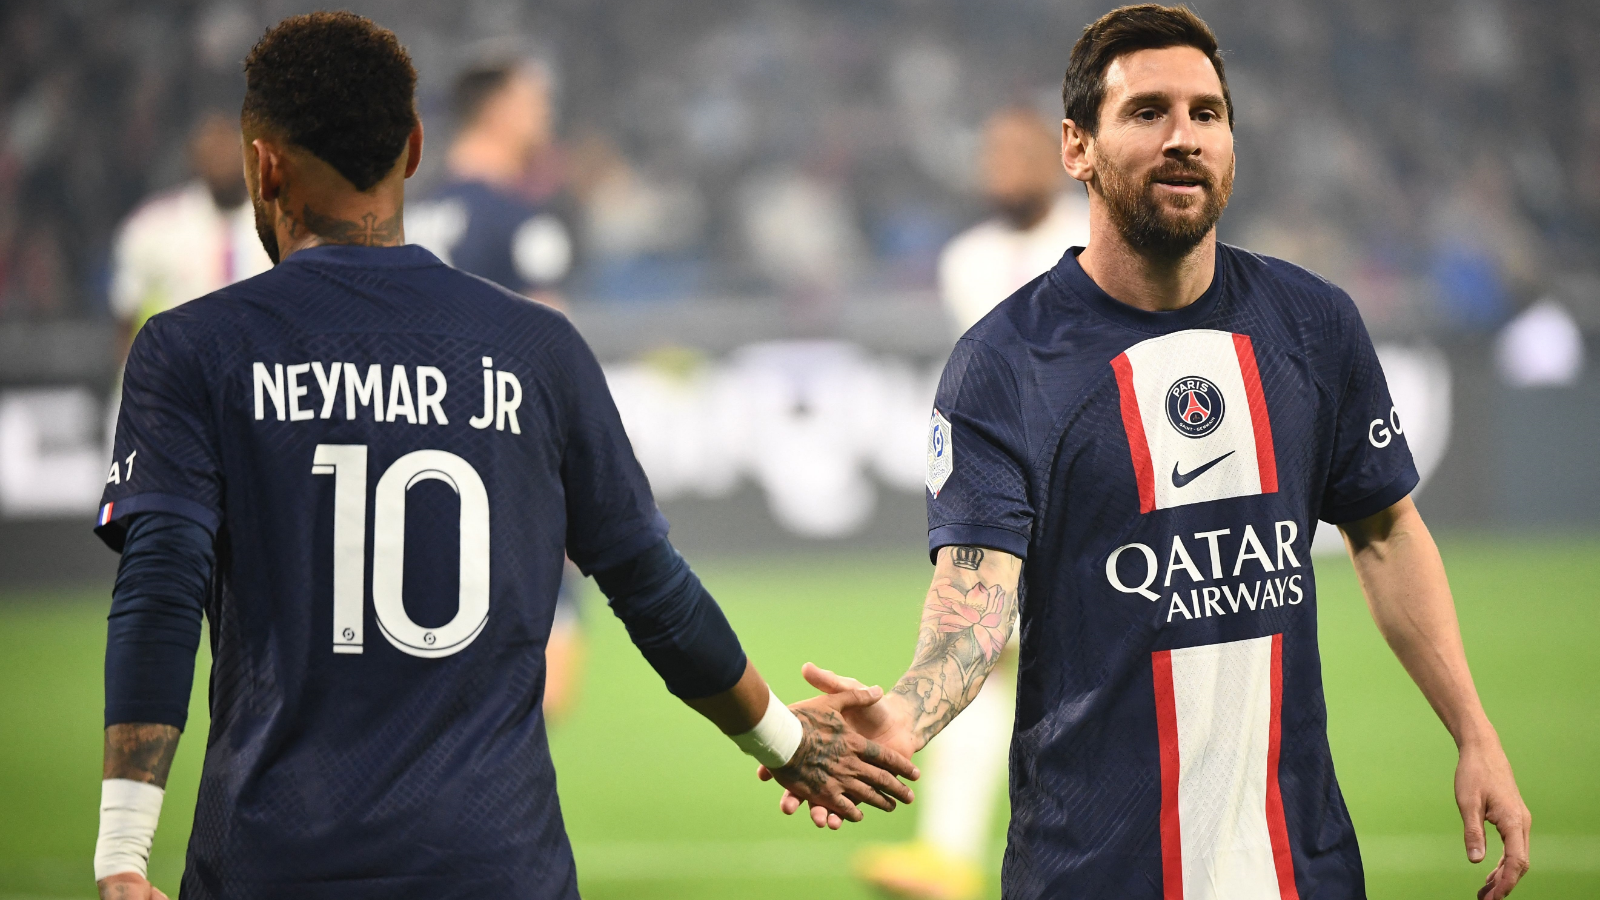 PSG vs Nice Live stream, TV channel, kick-off time and where to watch Goal